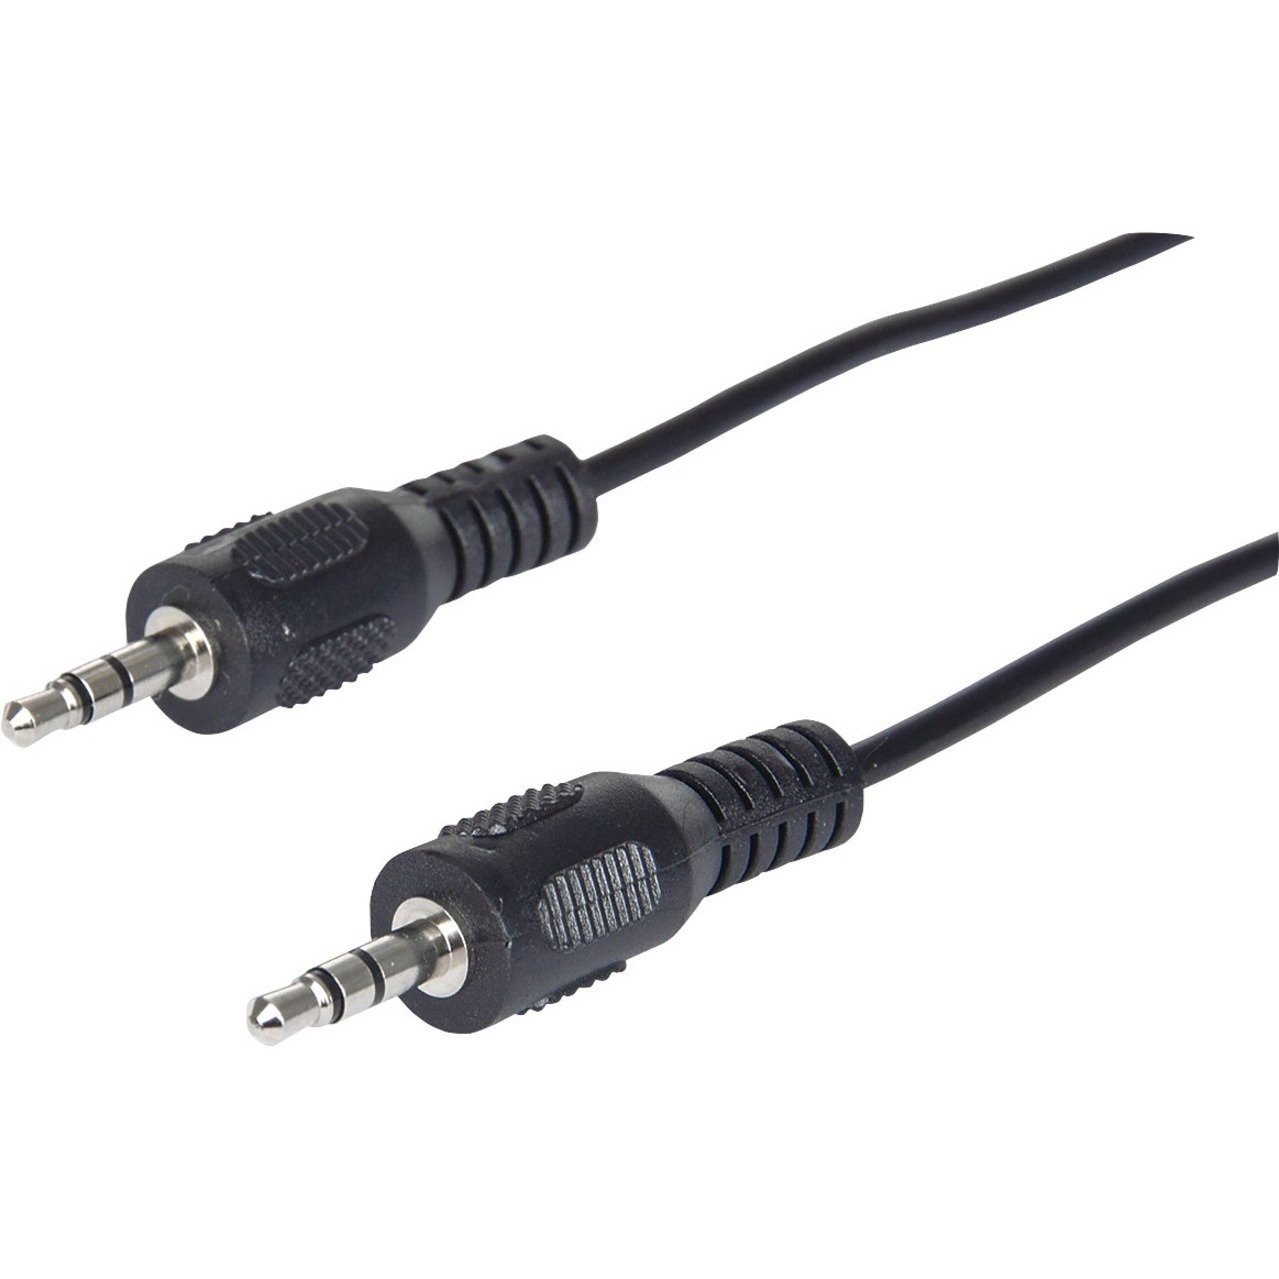 Manhattan Stereo Audio Cable - Mini-phone For Audio Device - 2.95 Ft - 1 X Mini-phone Male Stereo Audio - 1 X Mini-phone Male Stereo Audio - Black (393935) - image 1 of 3